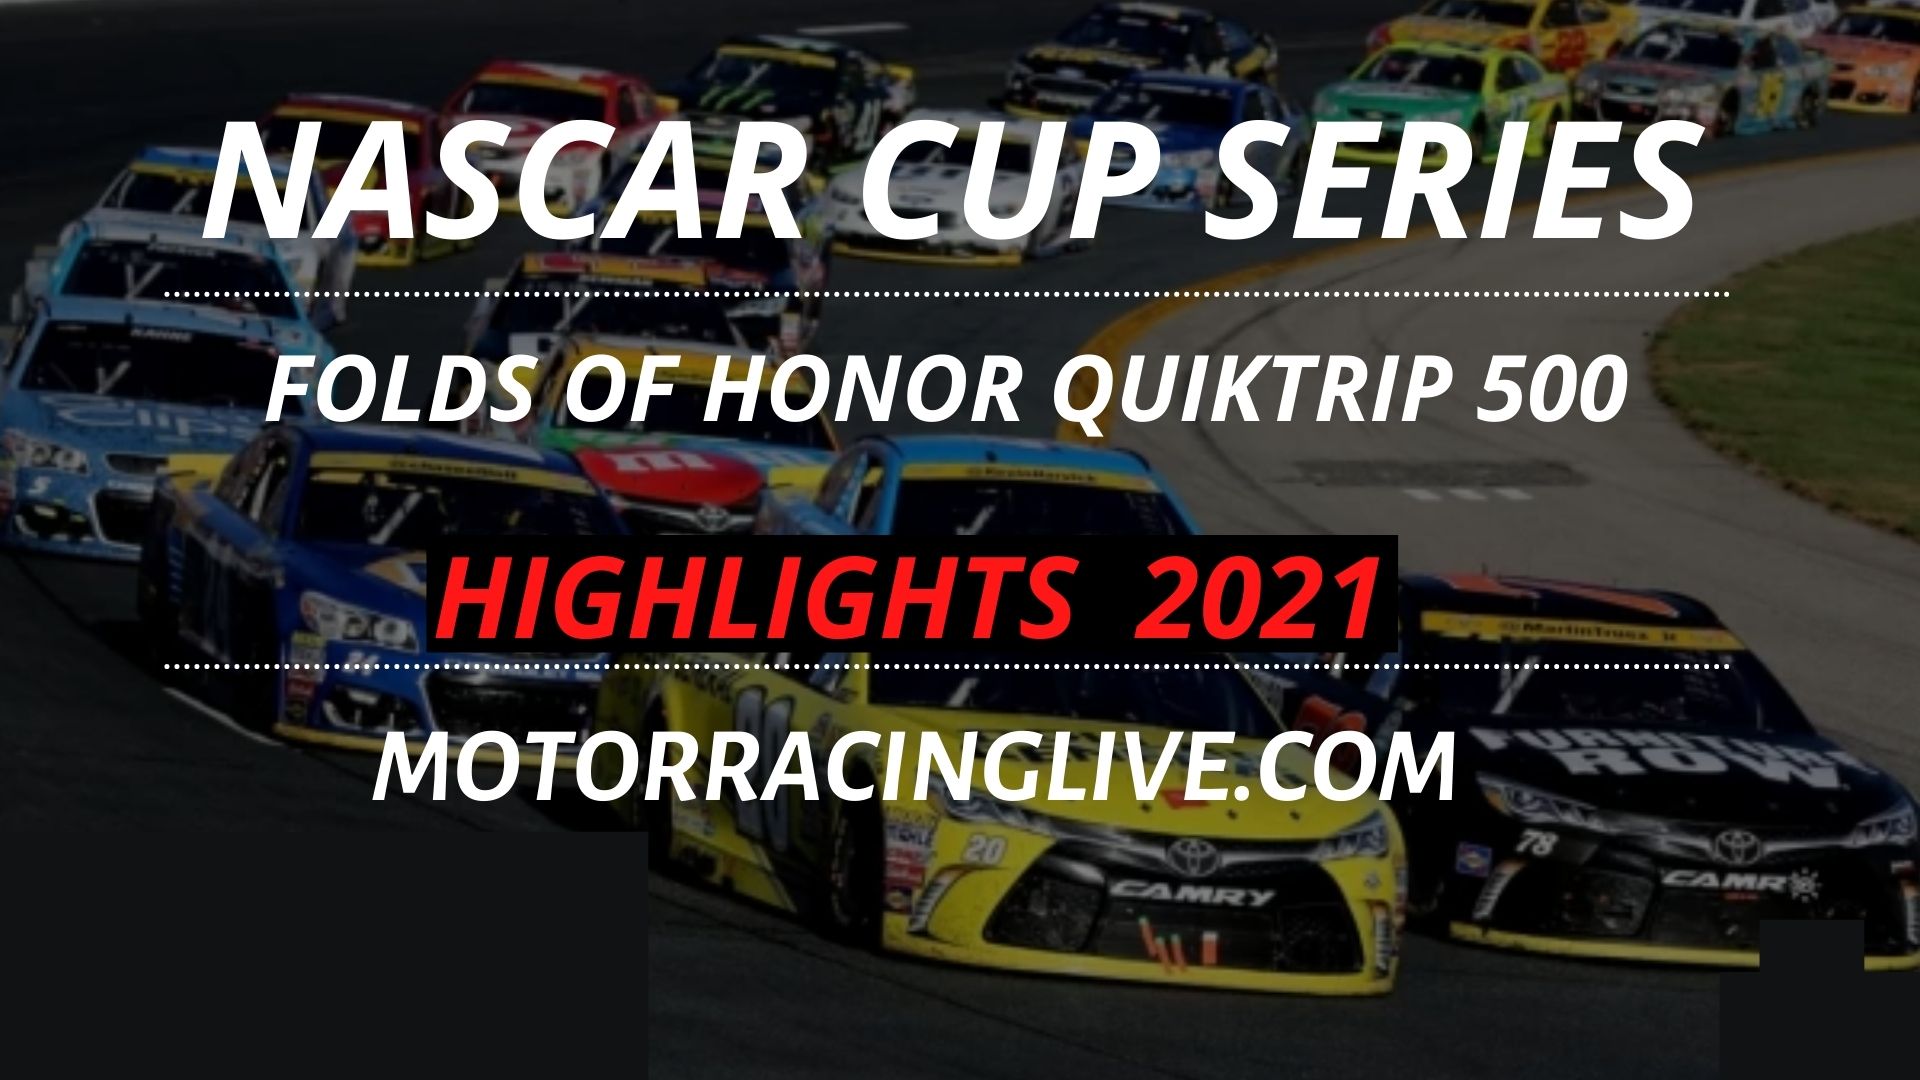 Folds Of Honor Quiktrip 500 Highlights 2021 Nascar Cup